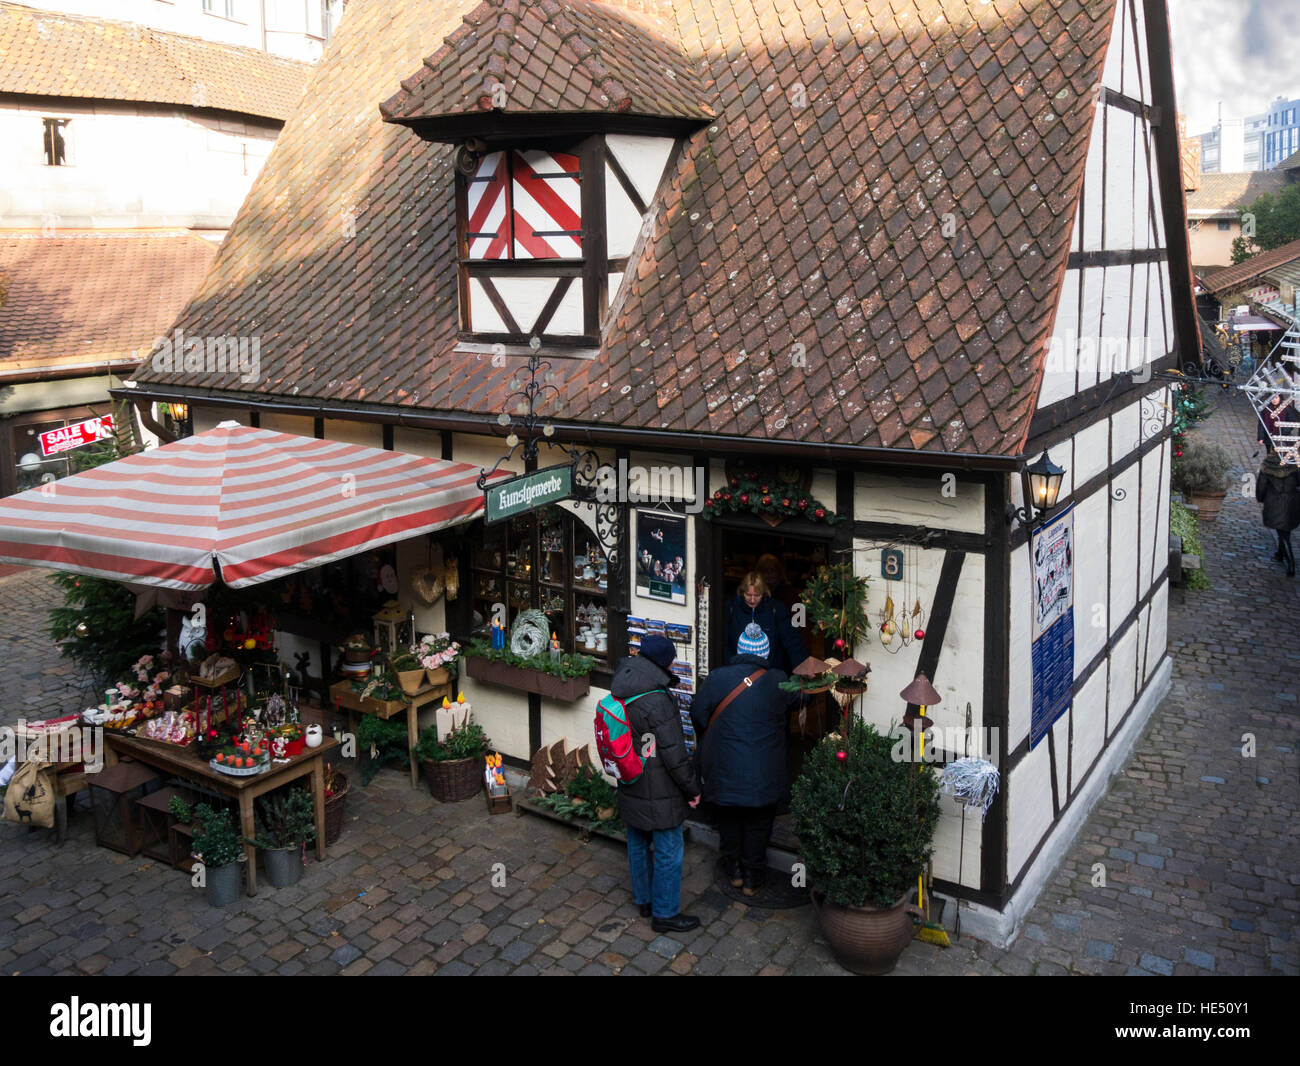 Looking down on shop in Craftsmens' Courtyard Handwerkerhof Nuremberg Bavaria Germany EU area of small traditional craft shops for gifts and souvenirs Stock Photo